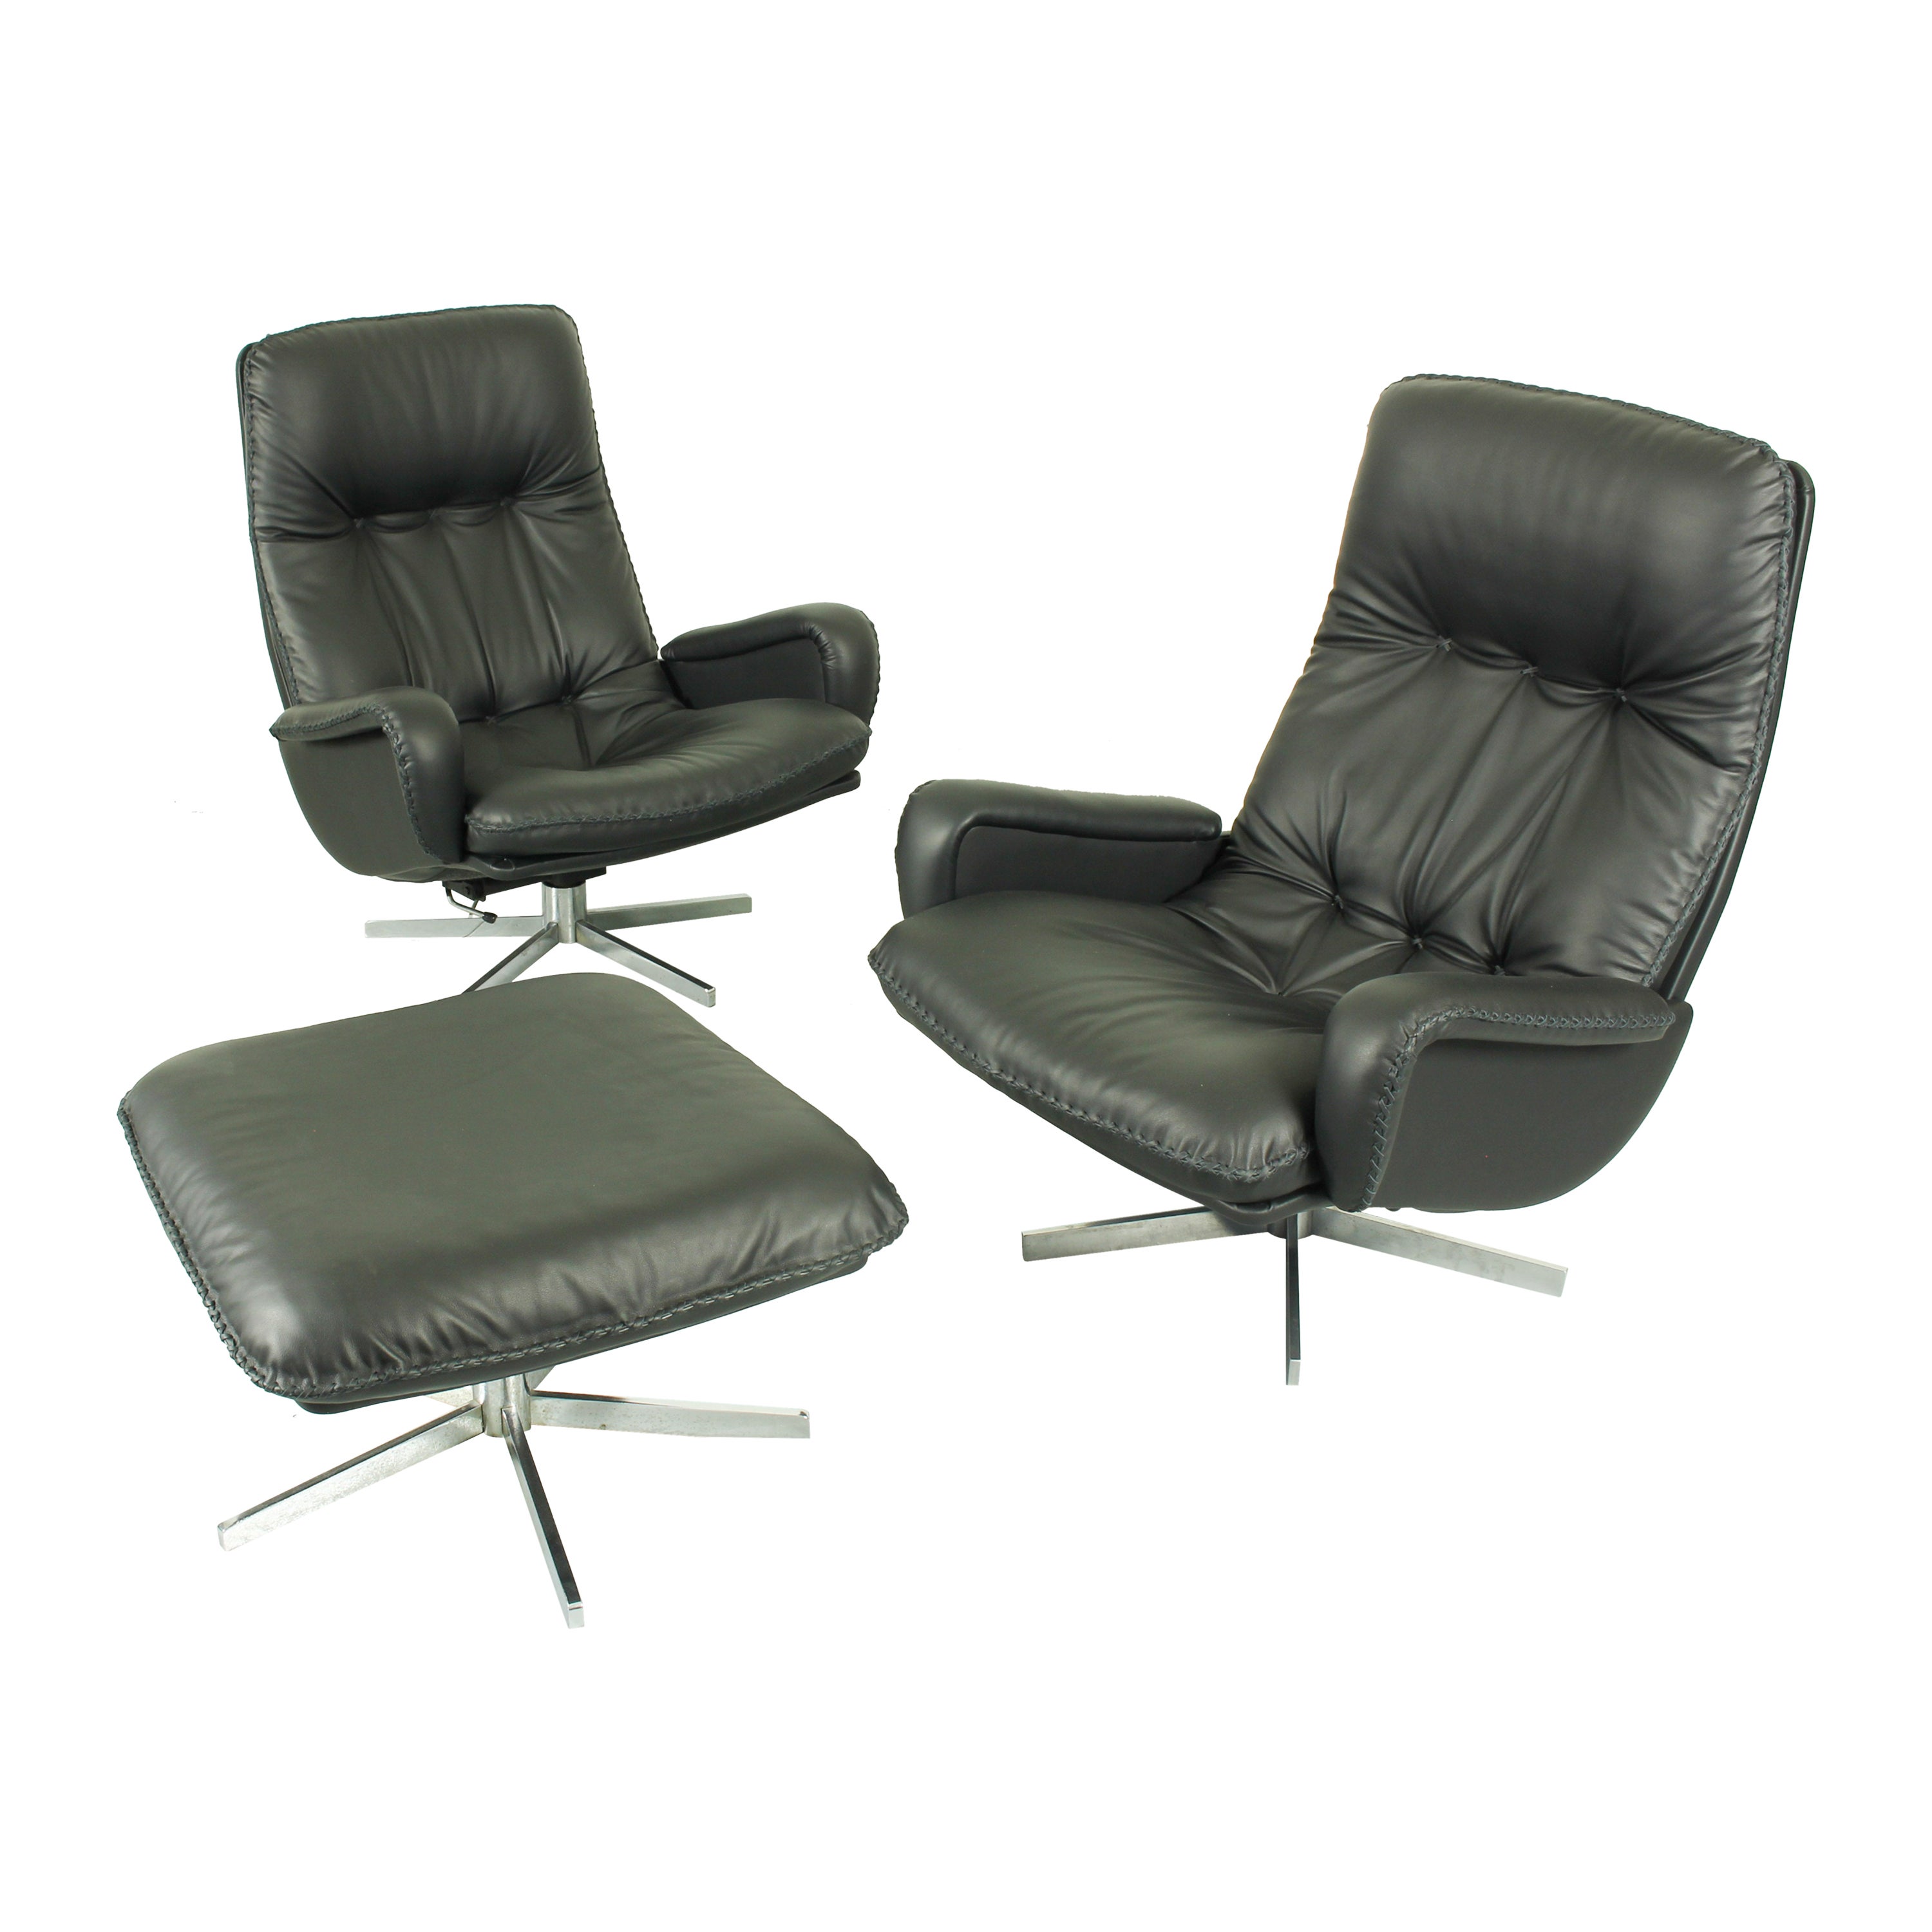 DS231 James Bond highback swivel chairs and matching ottoman by de Sede Switzerl